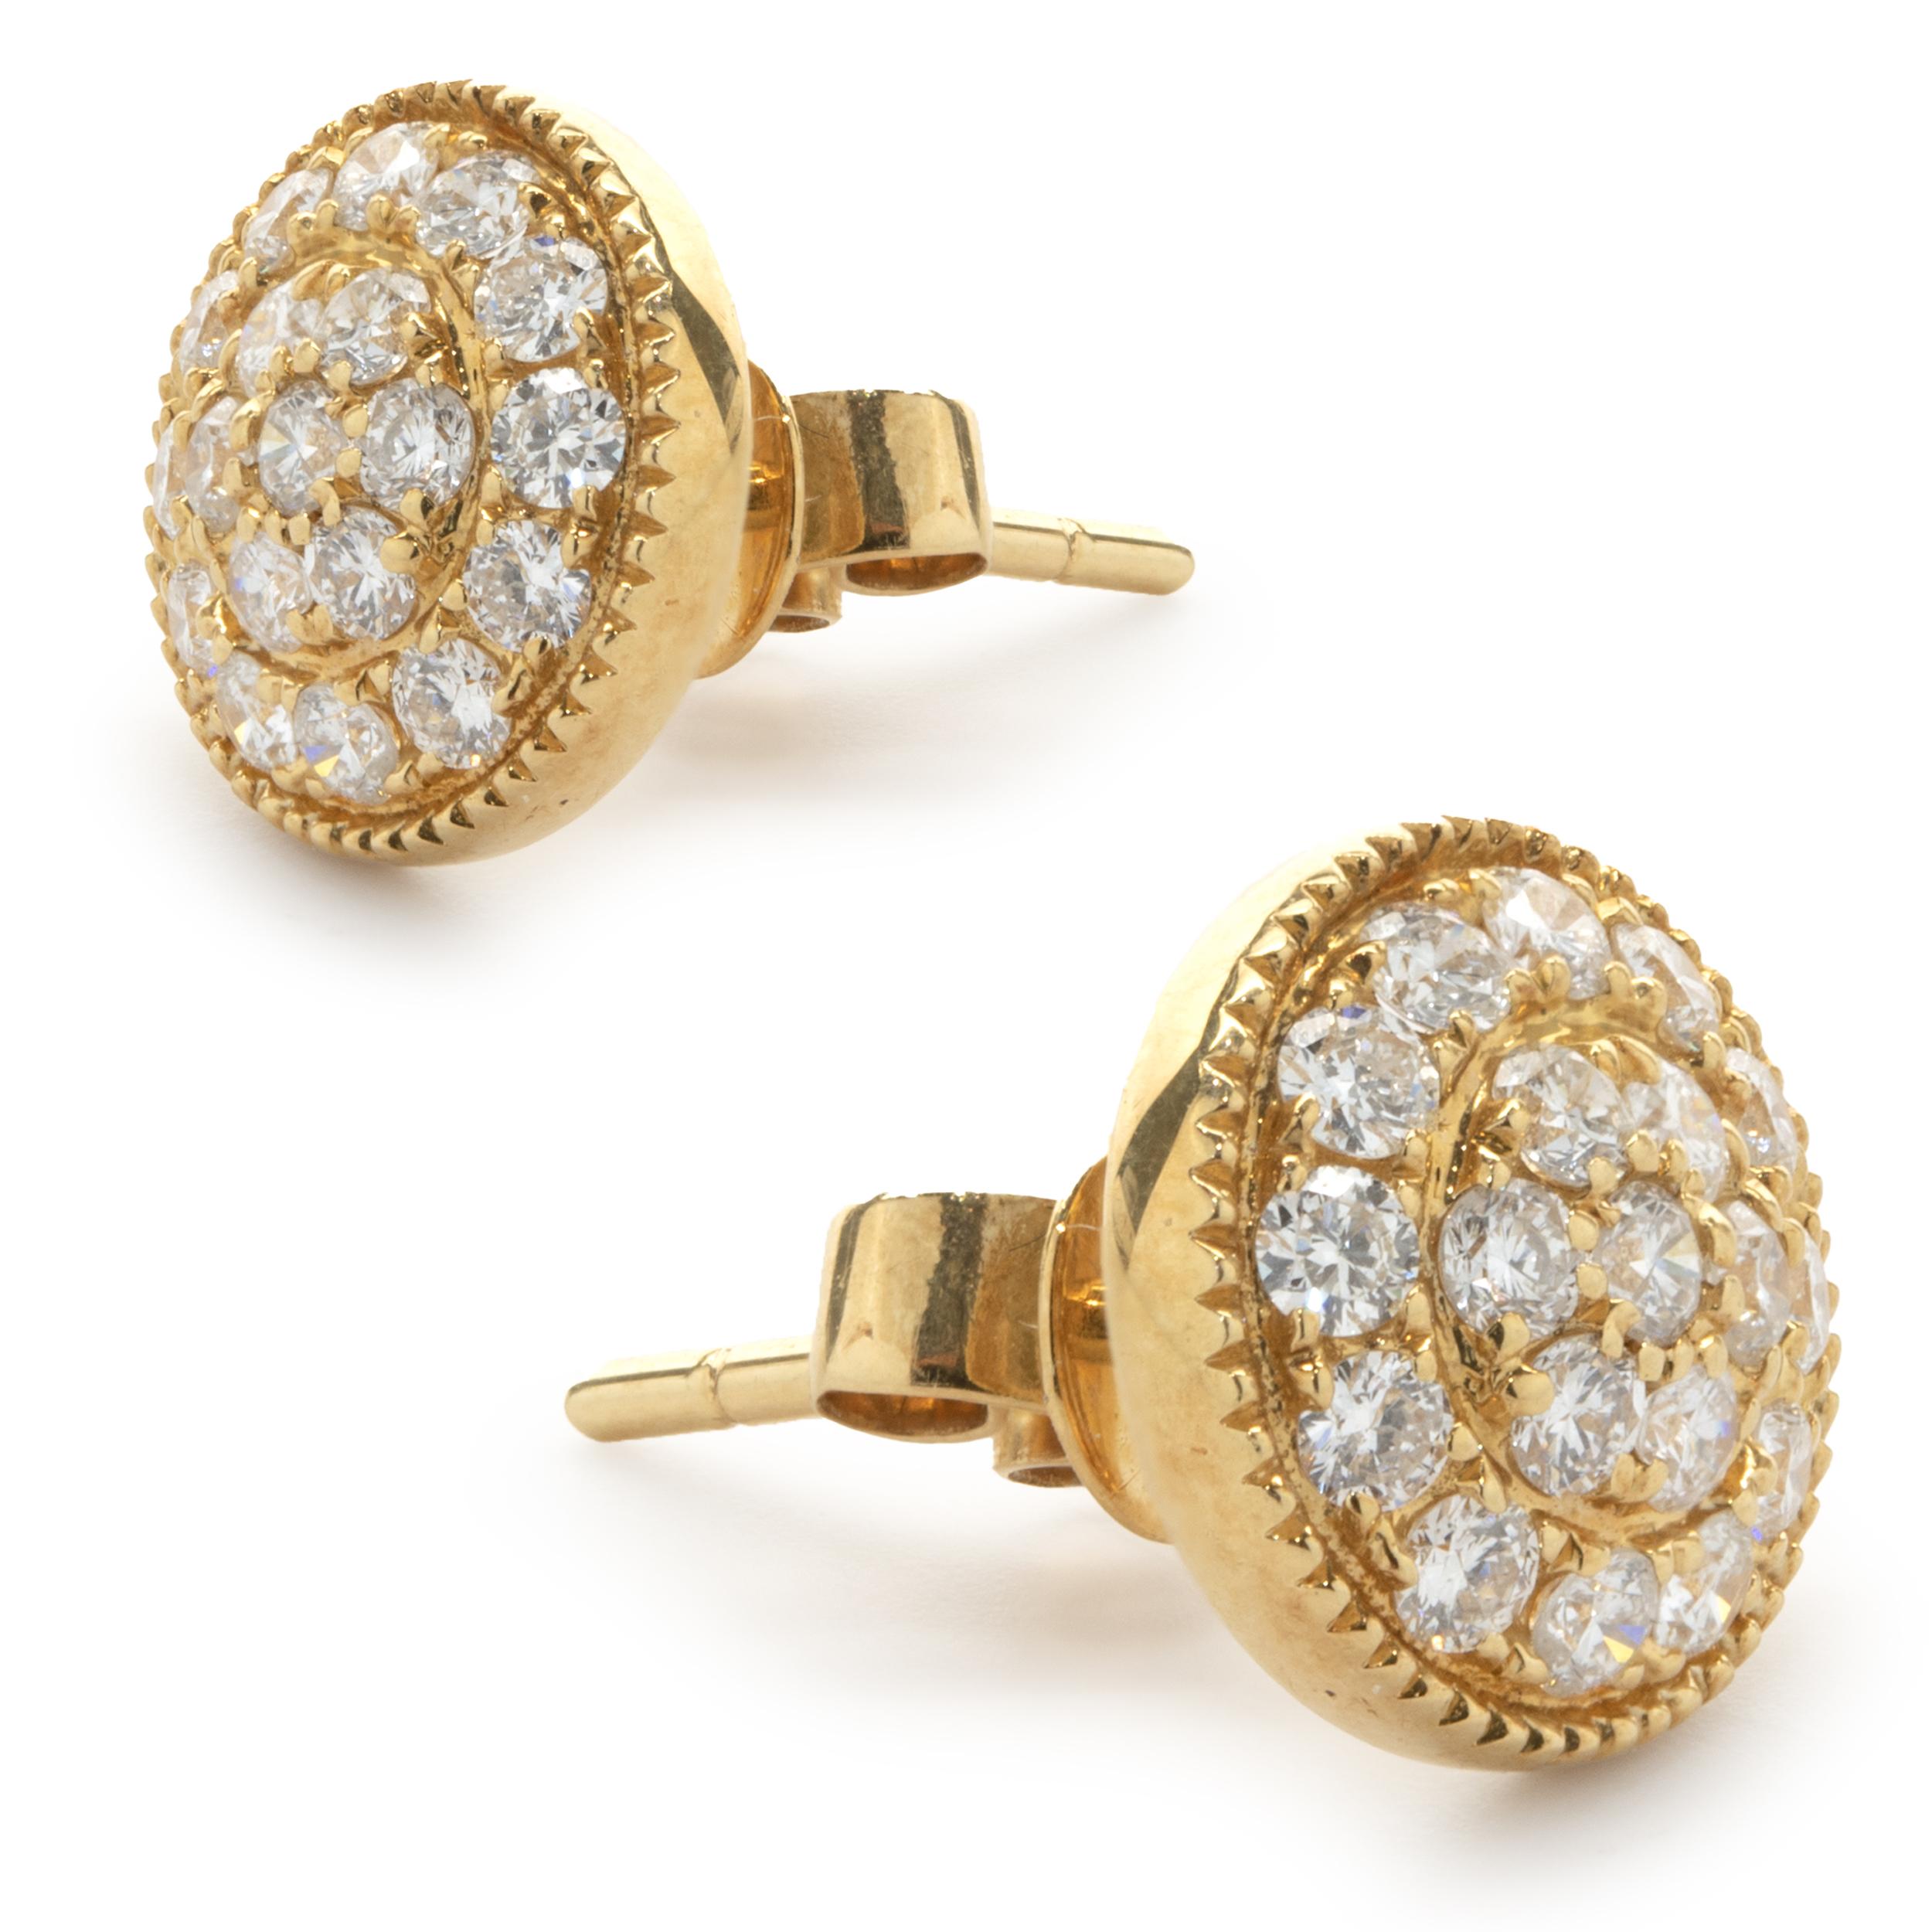 Designer: custom
Material: 18K yellow gold
Diamond: 38 round brilliant cut = 0.70cttw
Color: G
Clarity: VS
Dimensions: earrings measure 15.5mm in length
Fastenings: Lapoisette	
Weight: 3.30 grams
